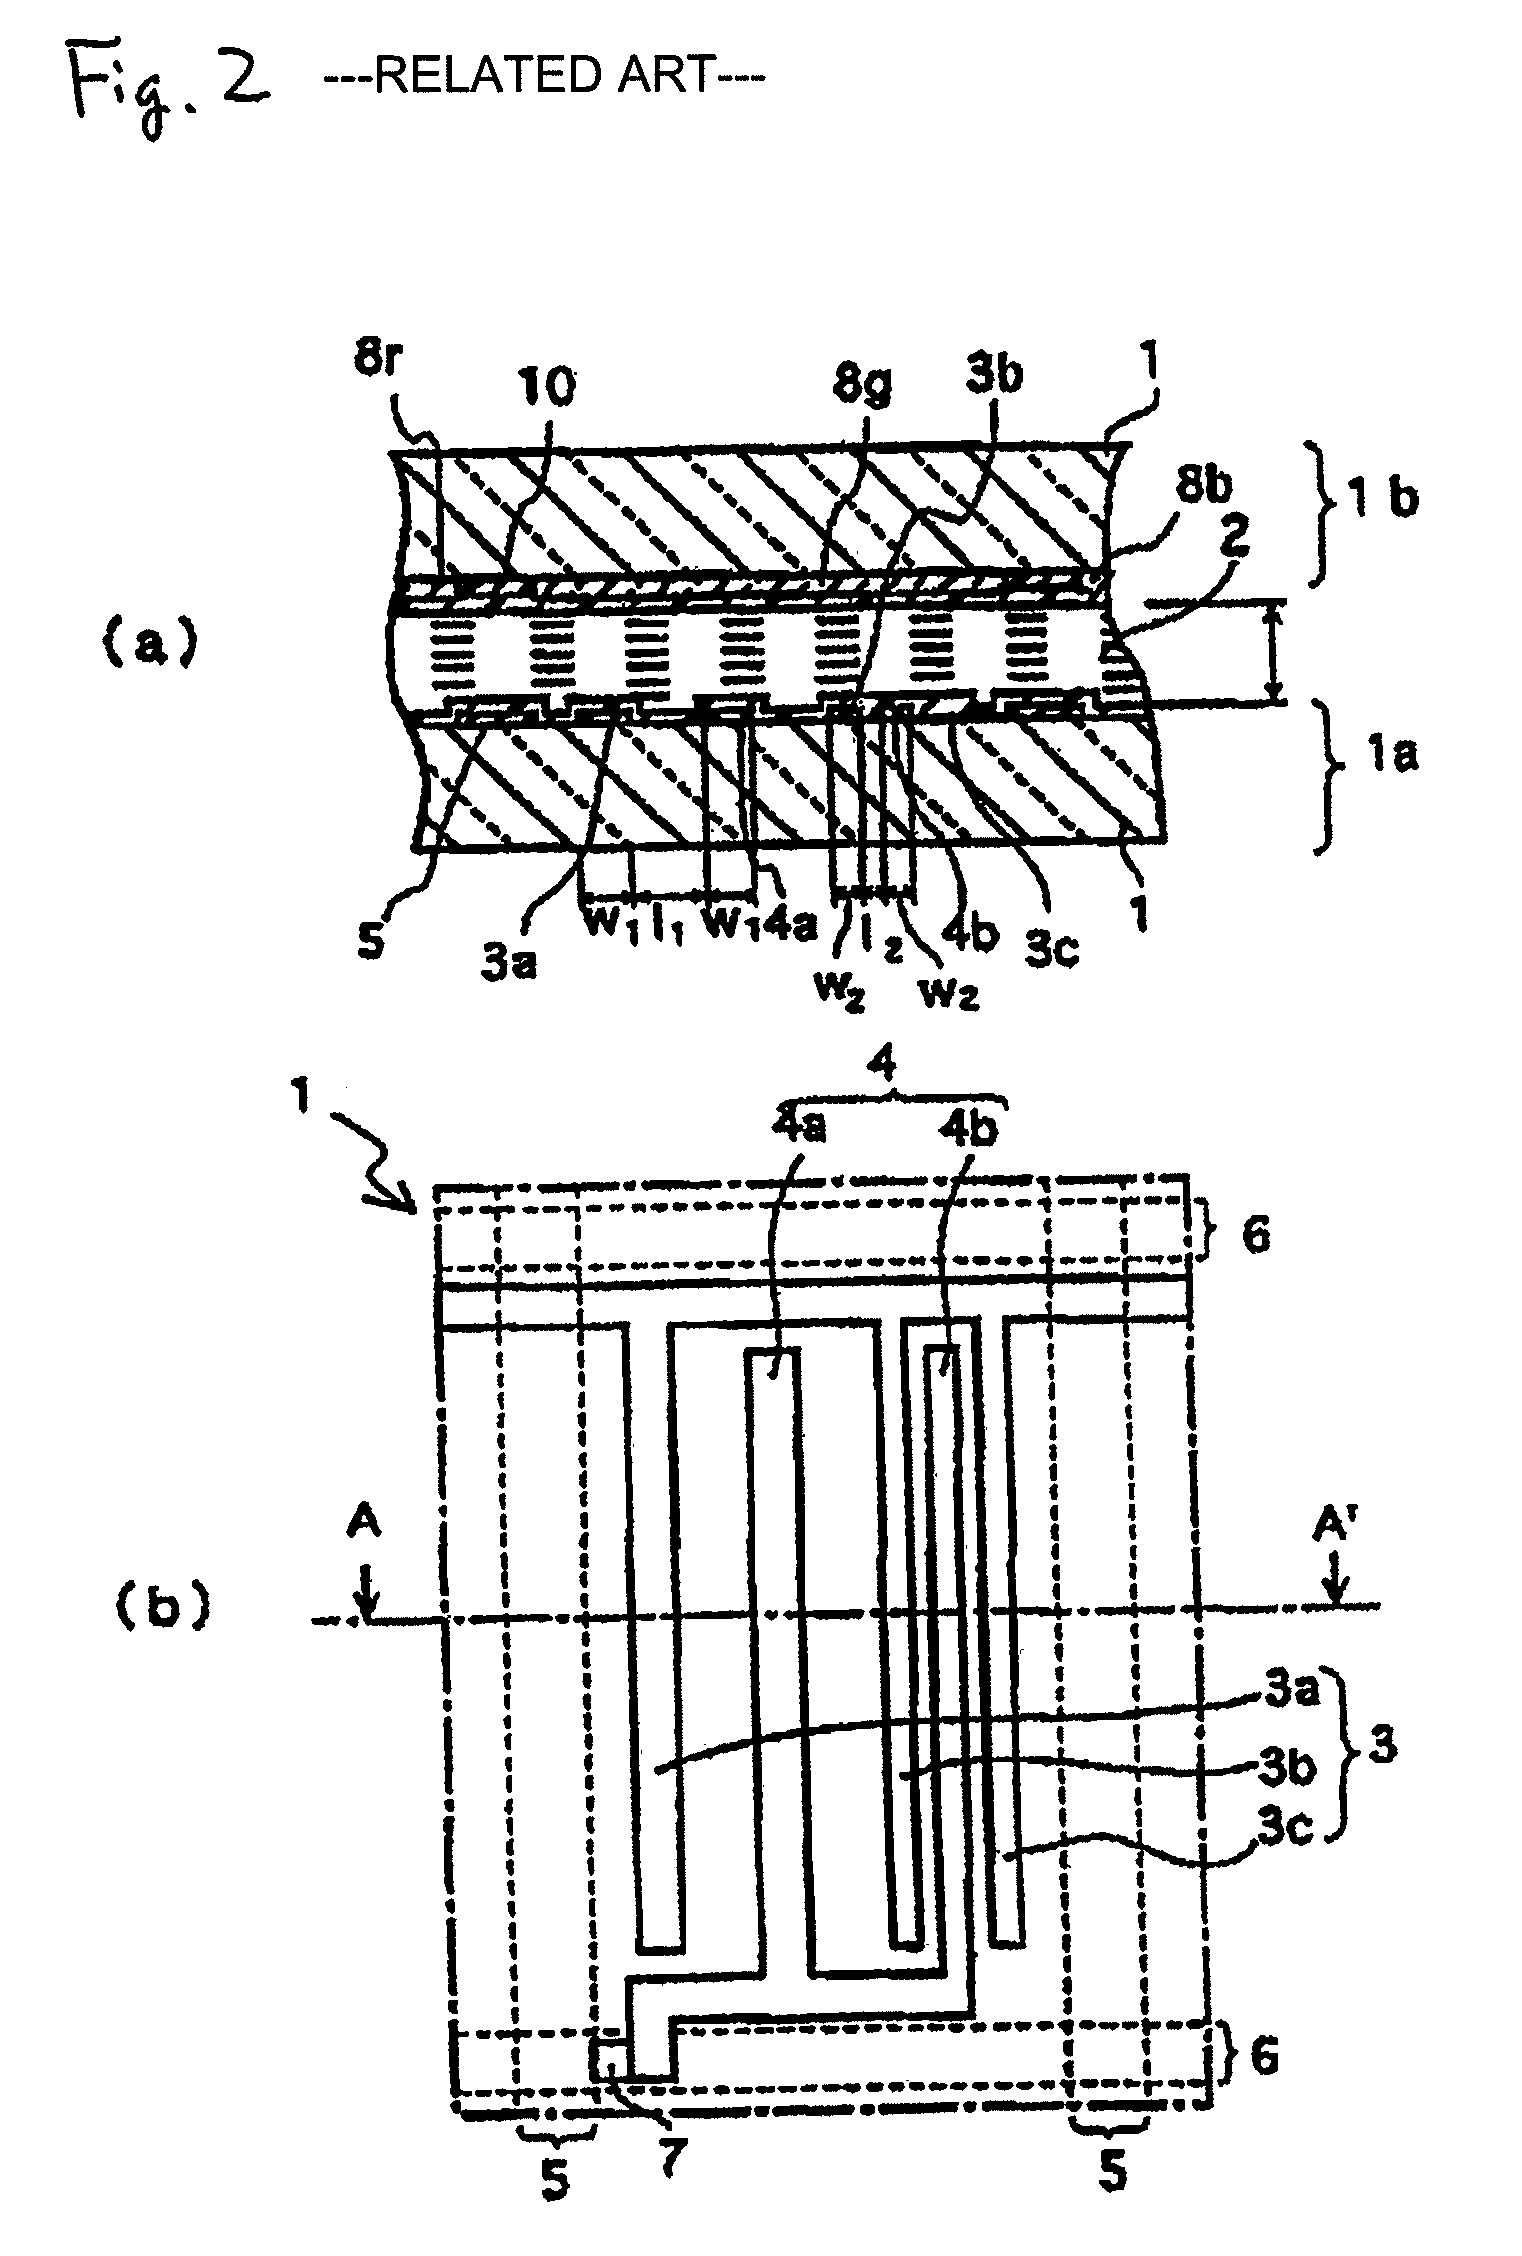 Liquid crystal display device comprising periodically changed permutations of at least two types of electrode-pattern pairs